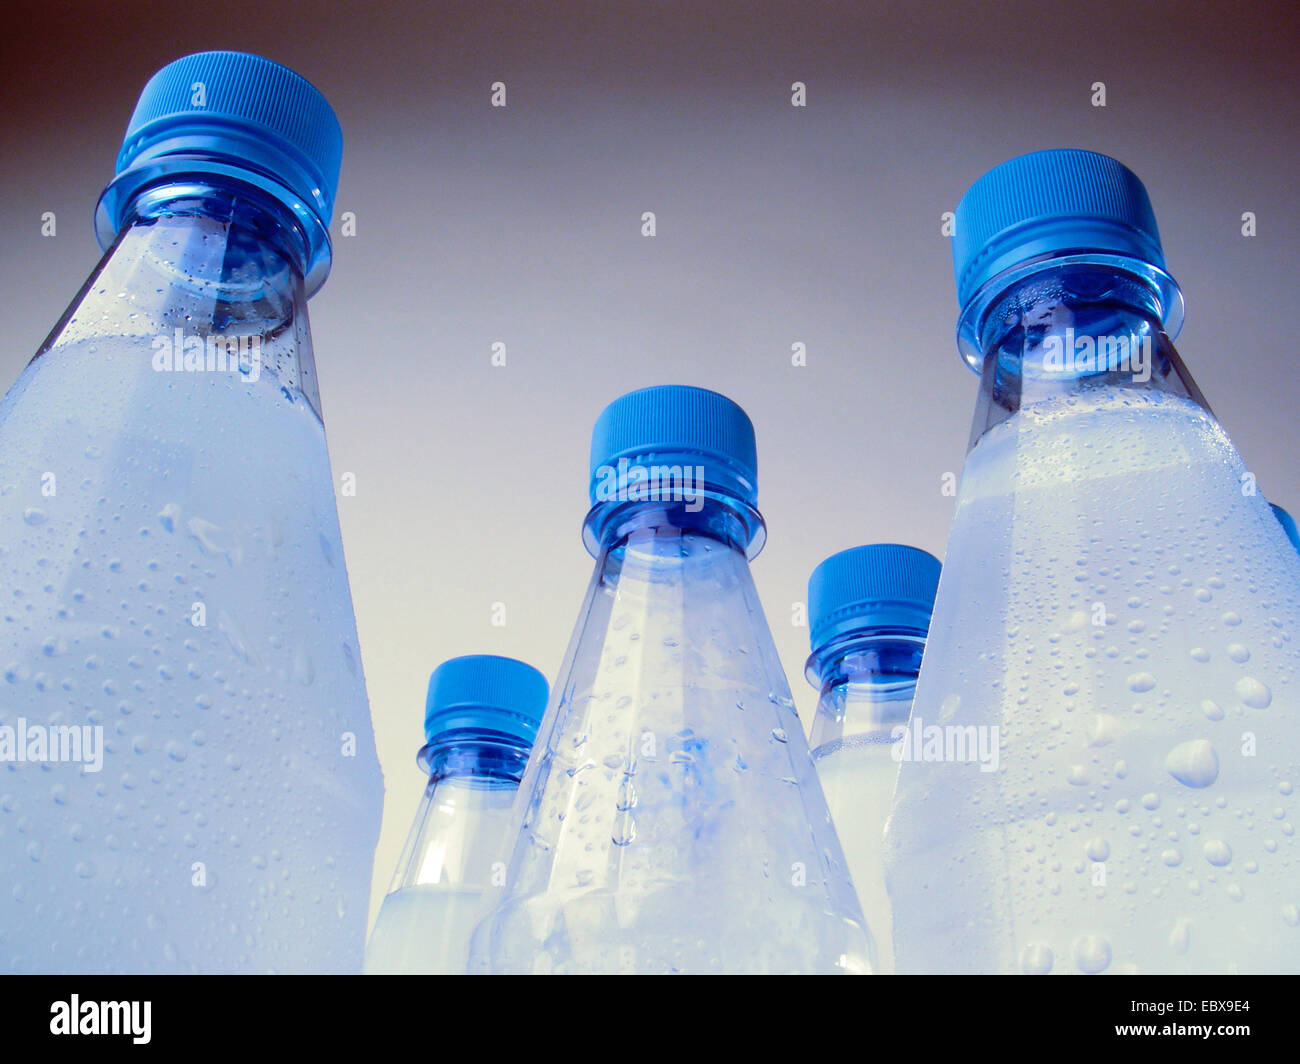 mineral water bottles Stock Photo